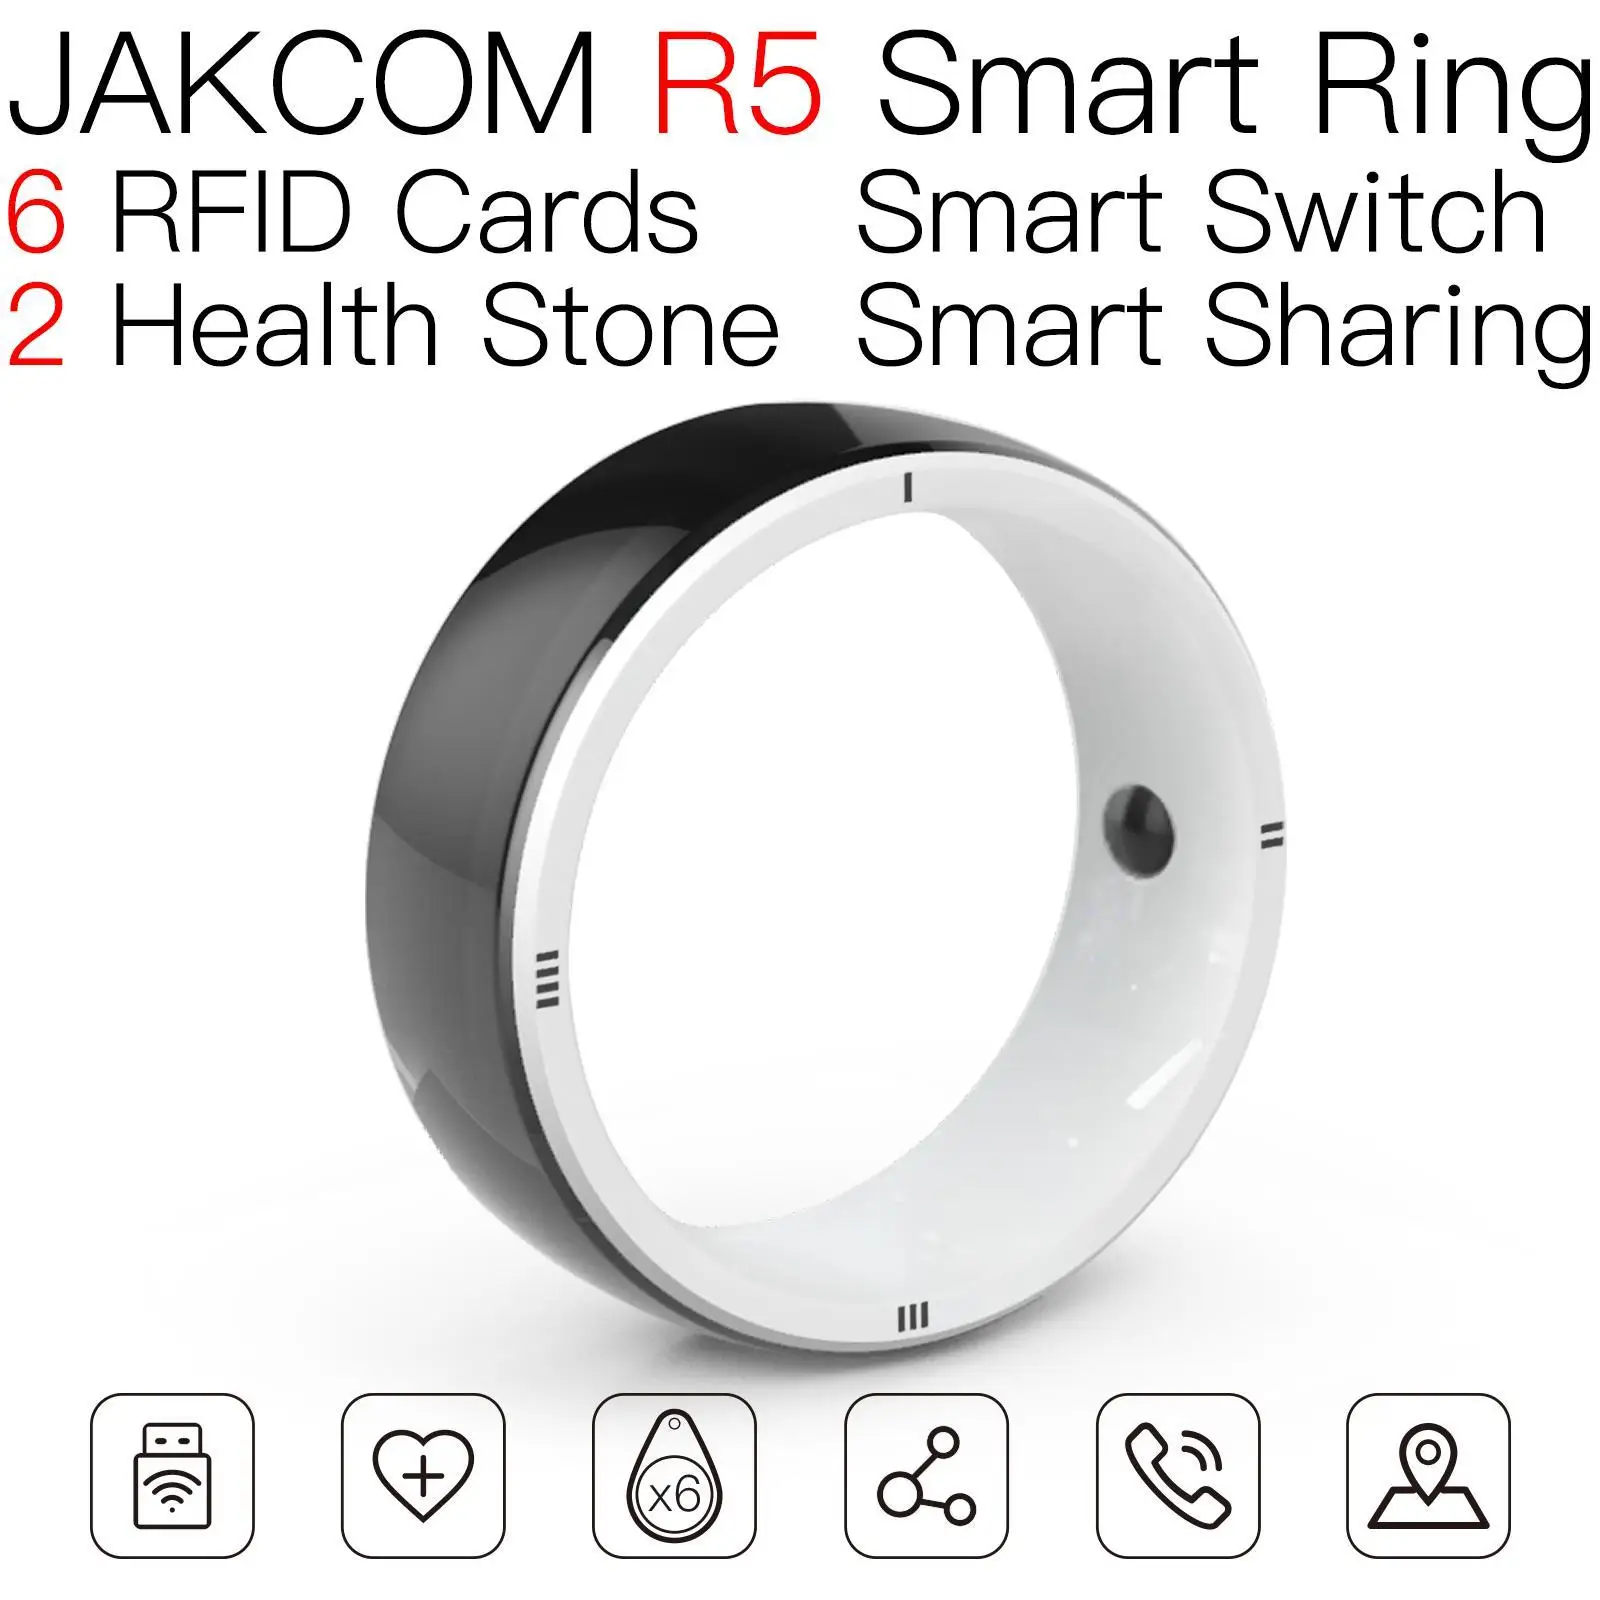 

JAKCOM R5 Smart Ring Newer than tag rfid jewel coil uhf frequency writer nfc sticker logo chip glas mhz ic uid stickers